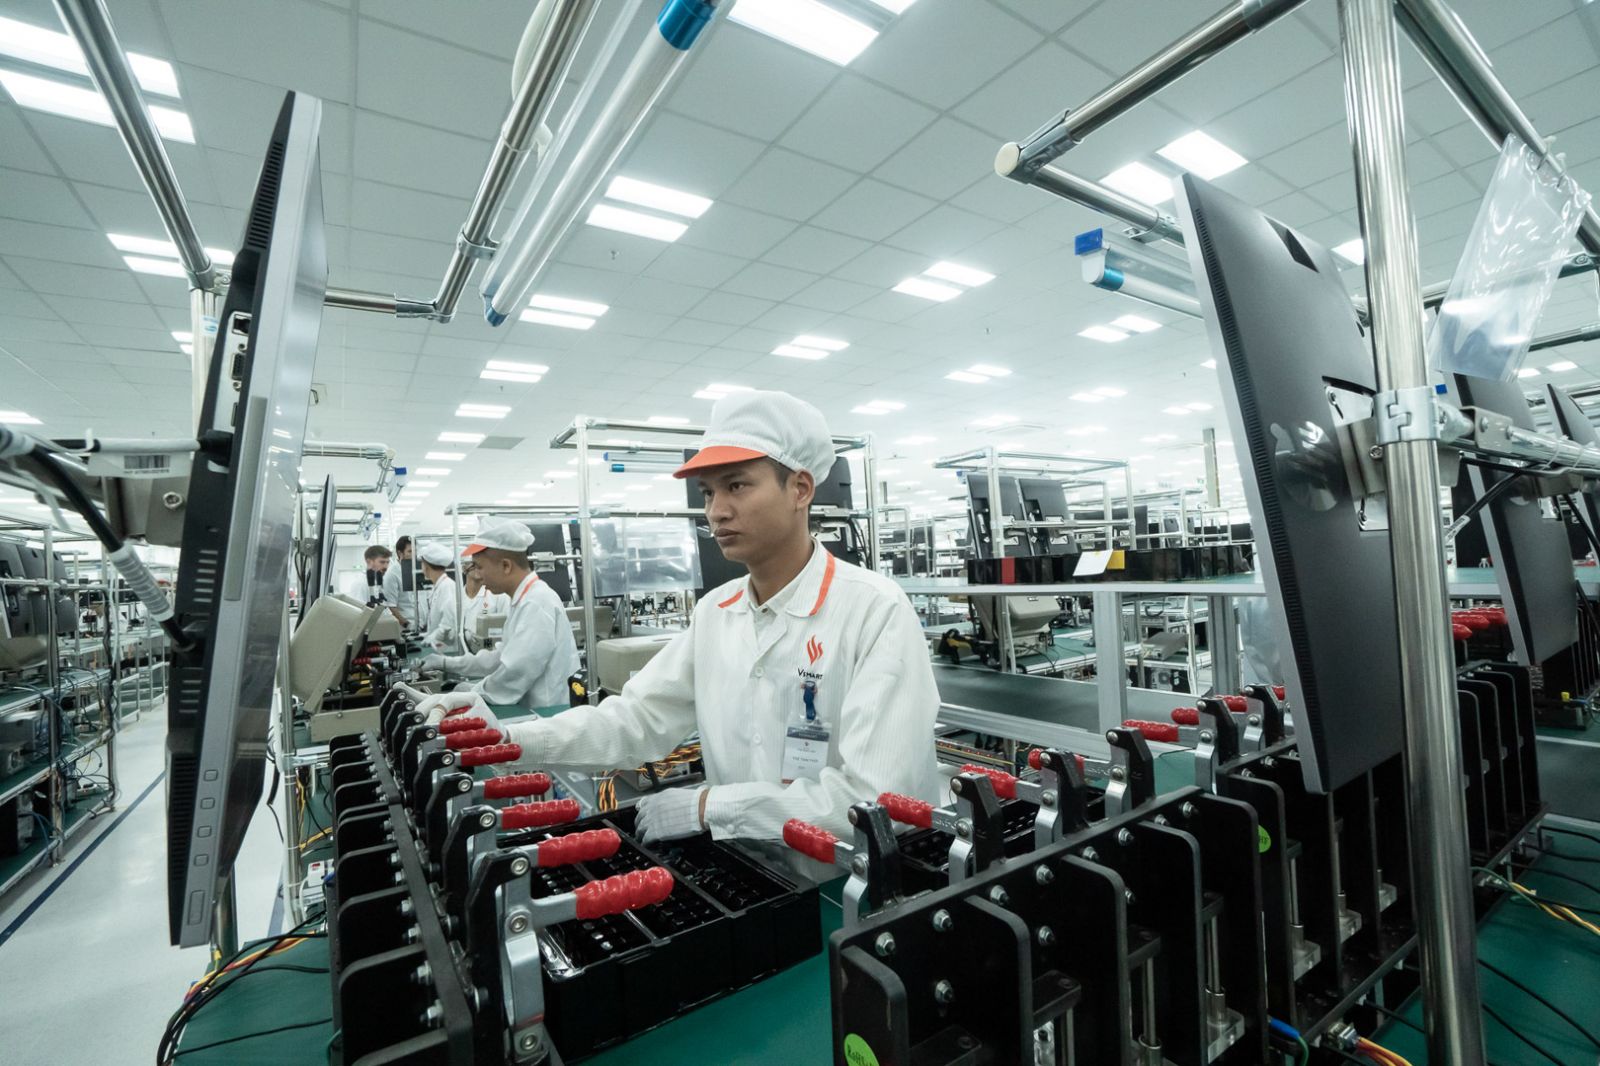 Employees are at work at a Vsmart phone plant in Haiphong City. Another Vsmart phone plant is expected to generate a maximum of 125 million smartphones a year when it is complete in early 2020. (Photo: B. Chi/Tuoi Tre)